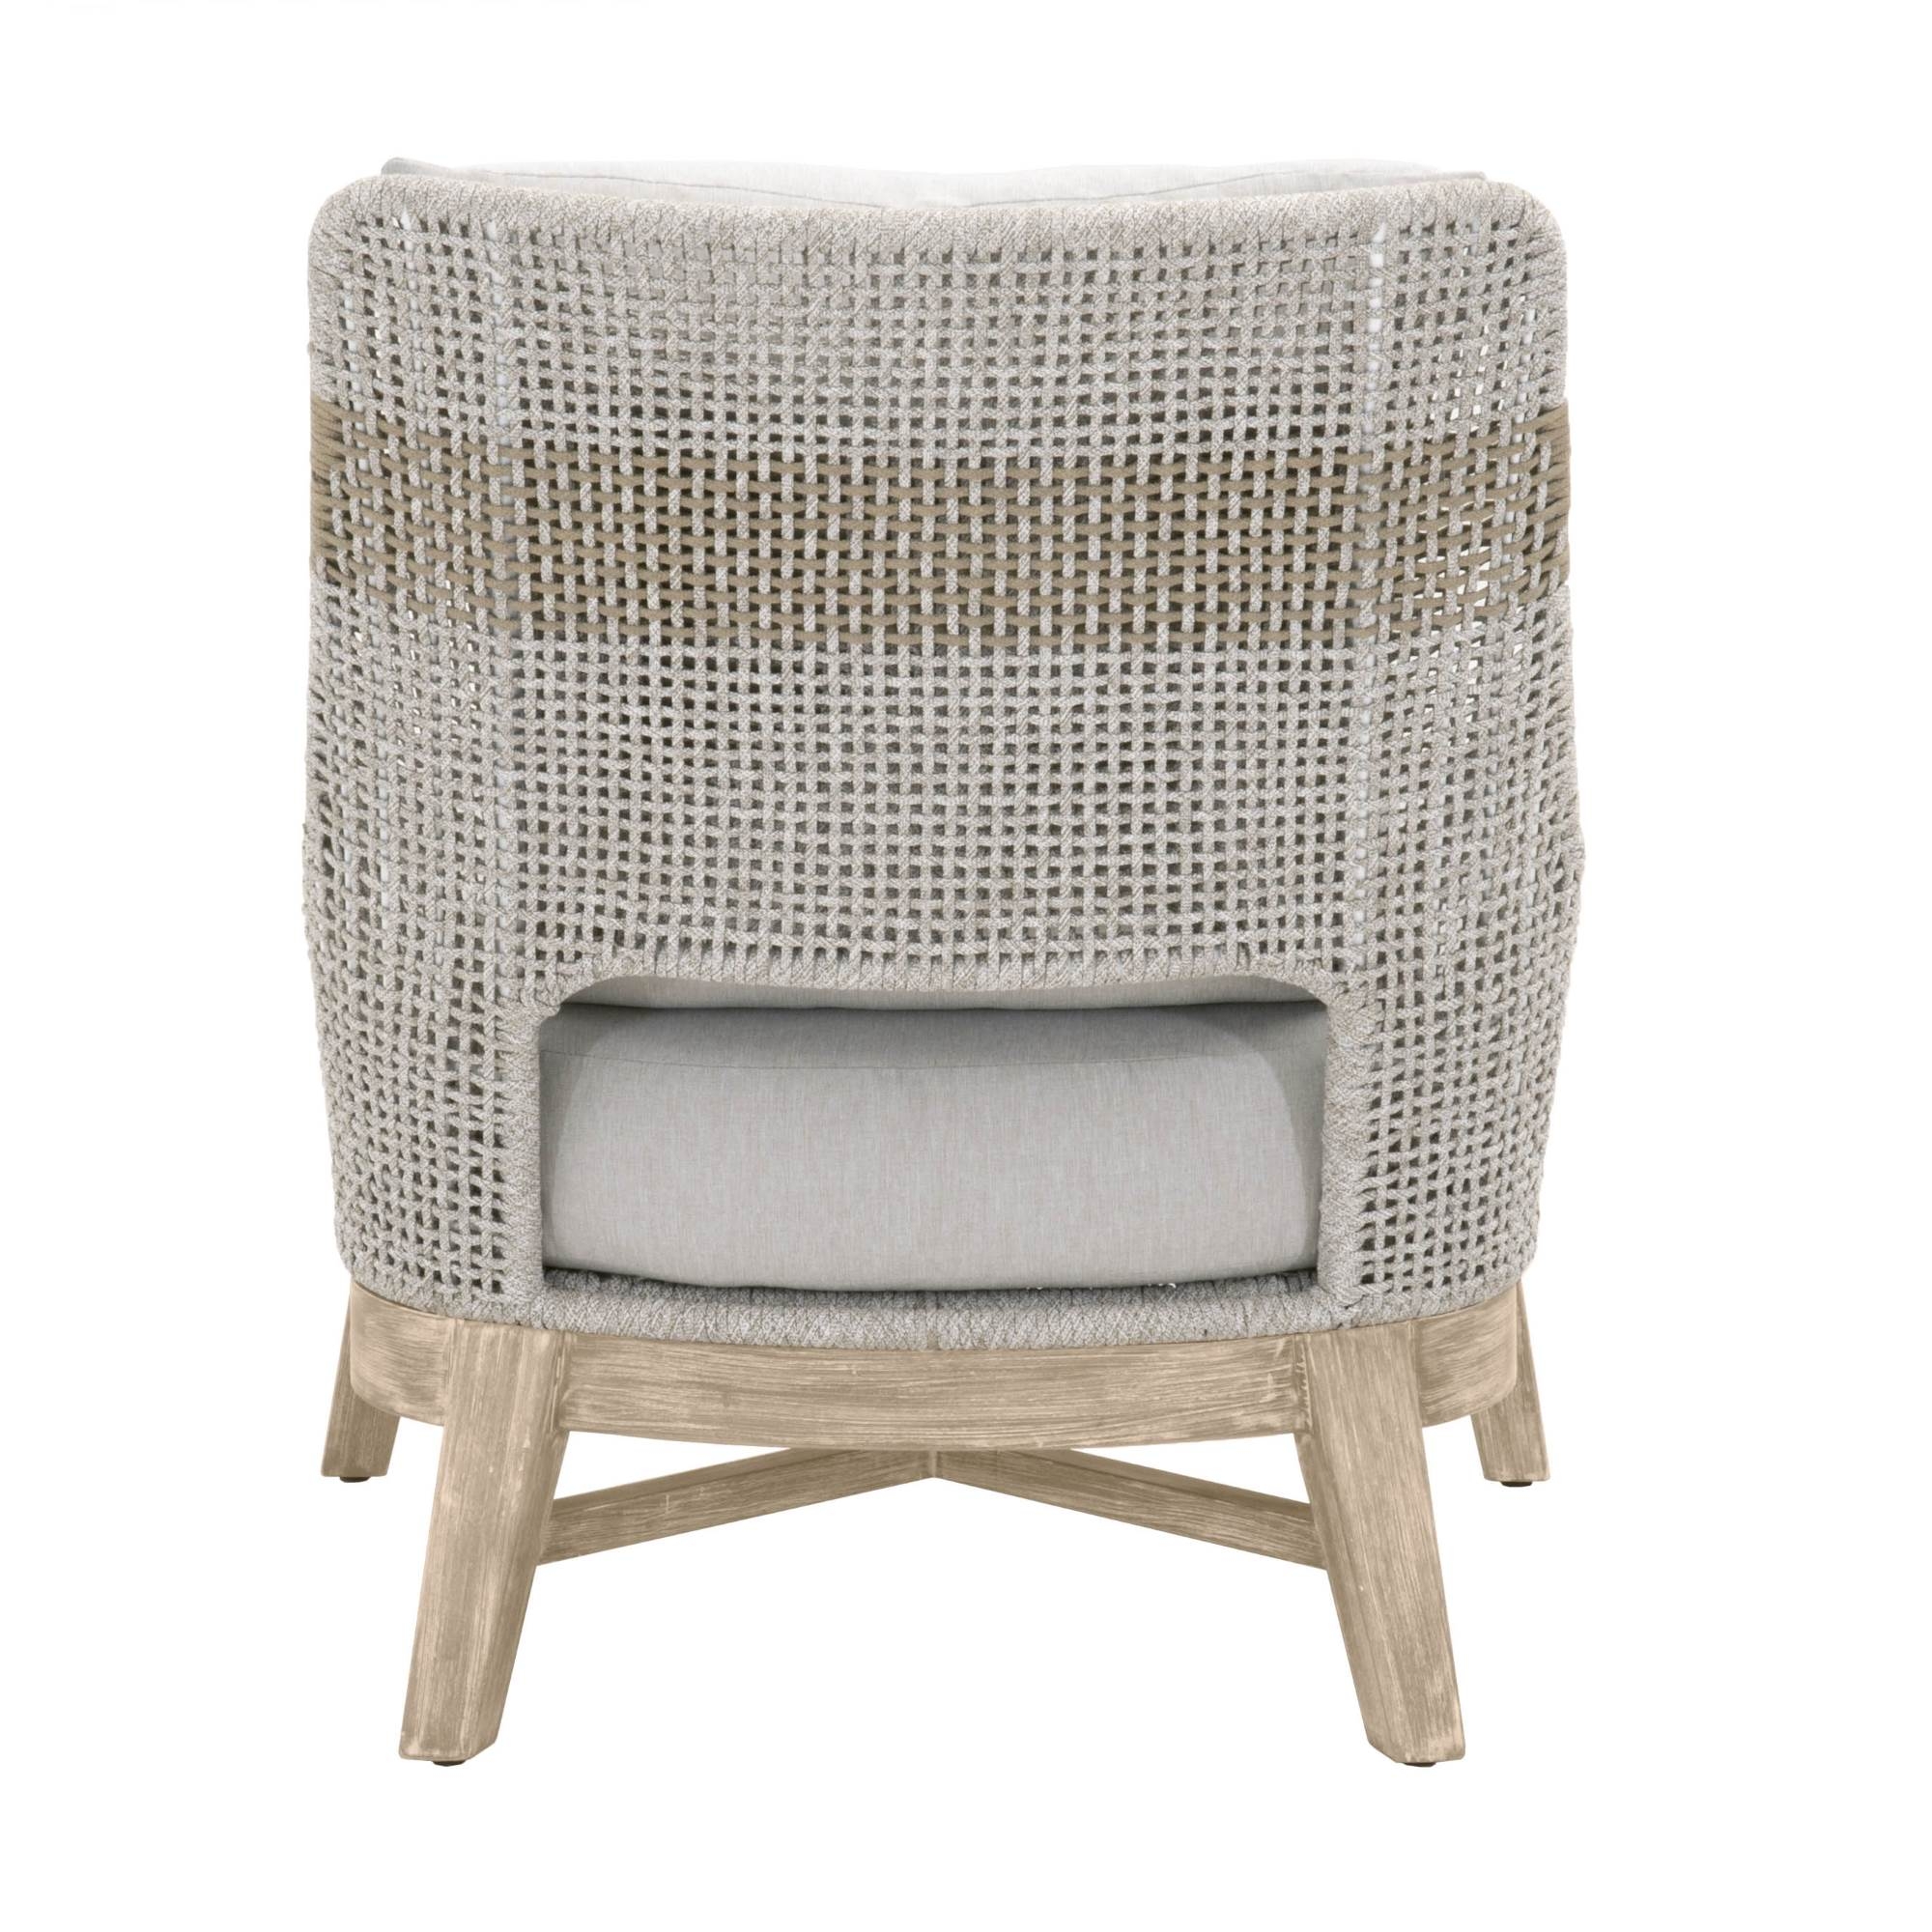 Panorama Indoor/Outdoor Club Chair, White Taupe - Image 4